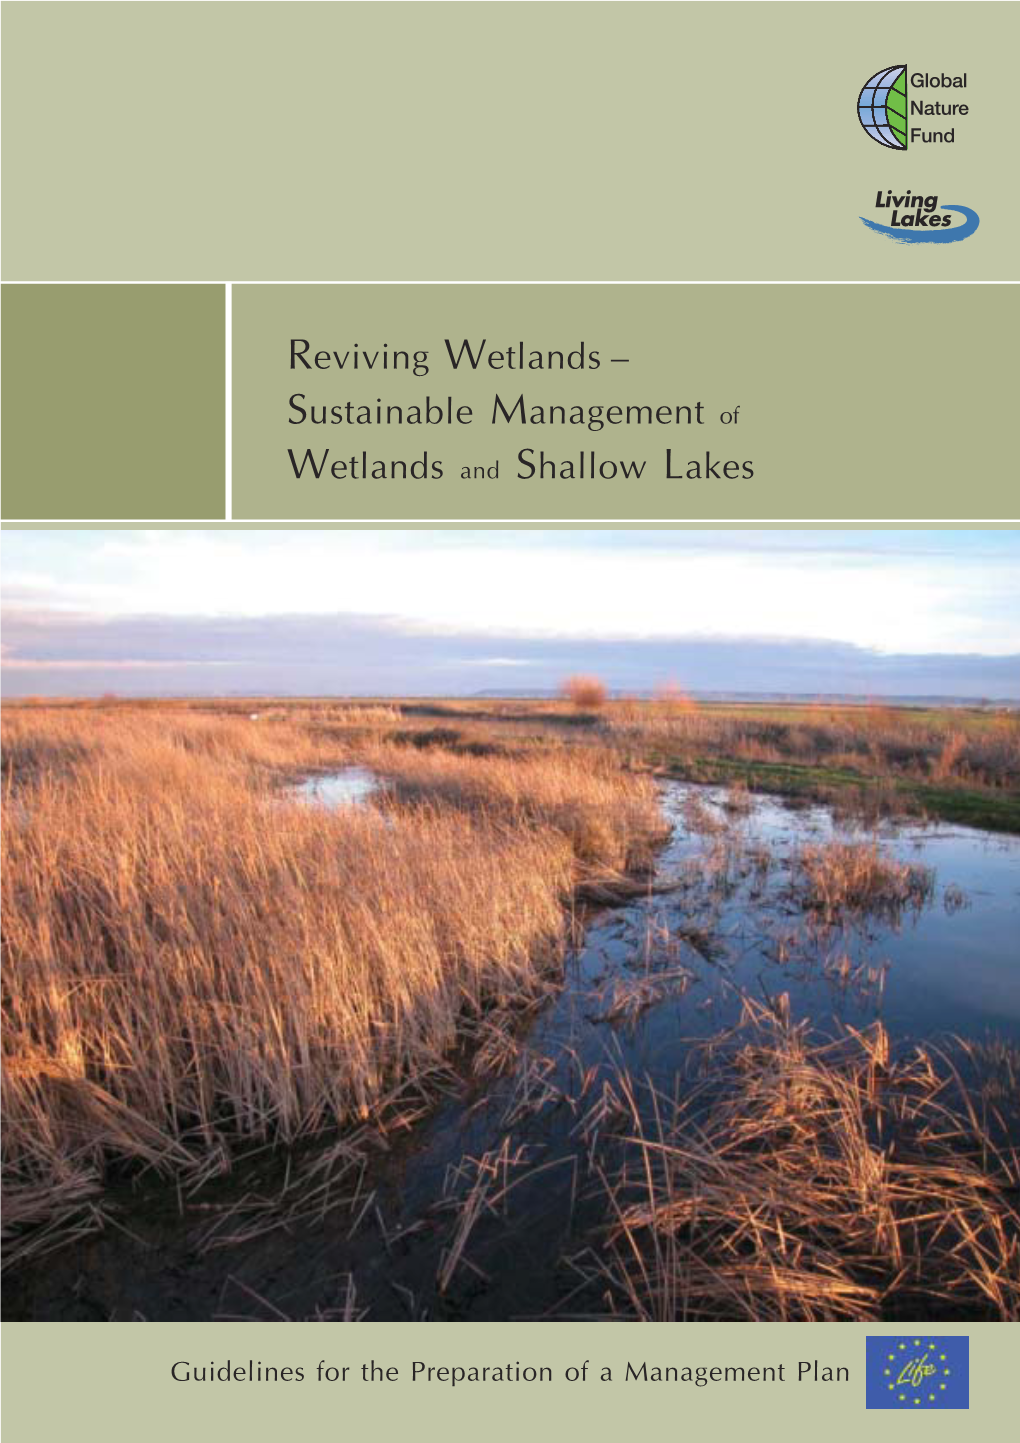 Sustainable Management of Wetlands and Shallow Lakes